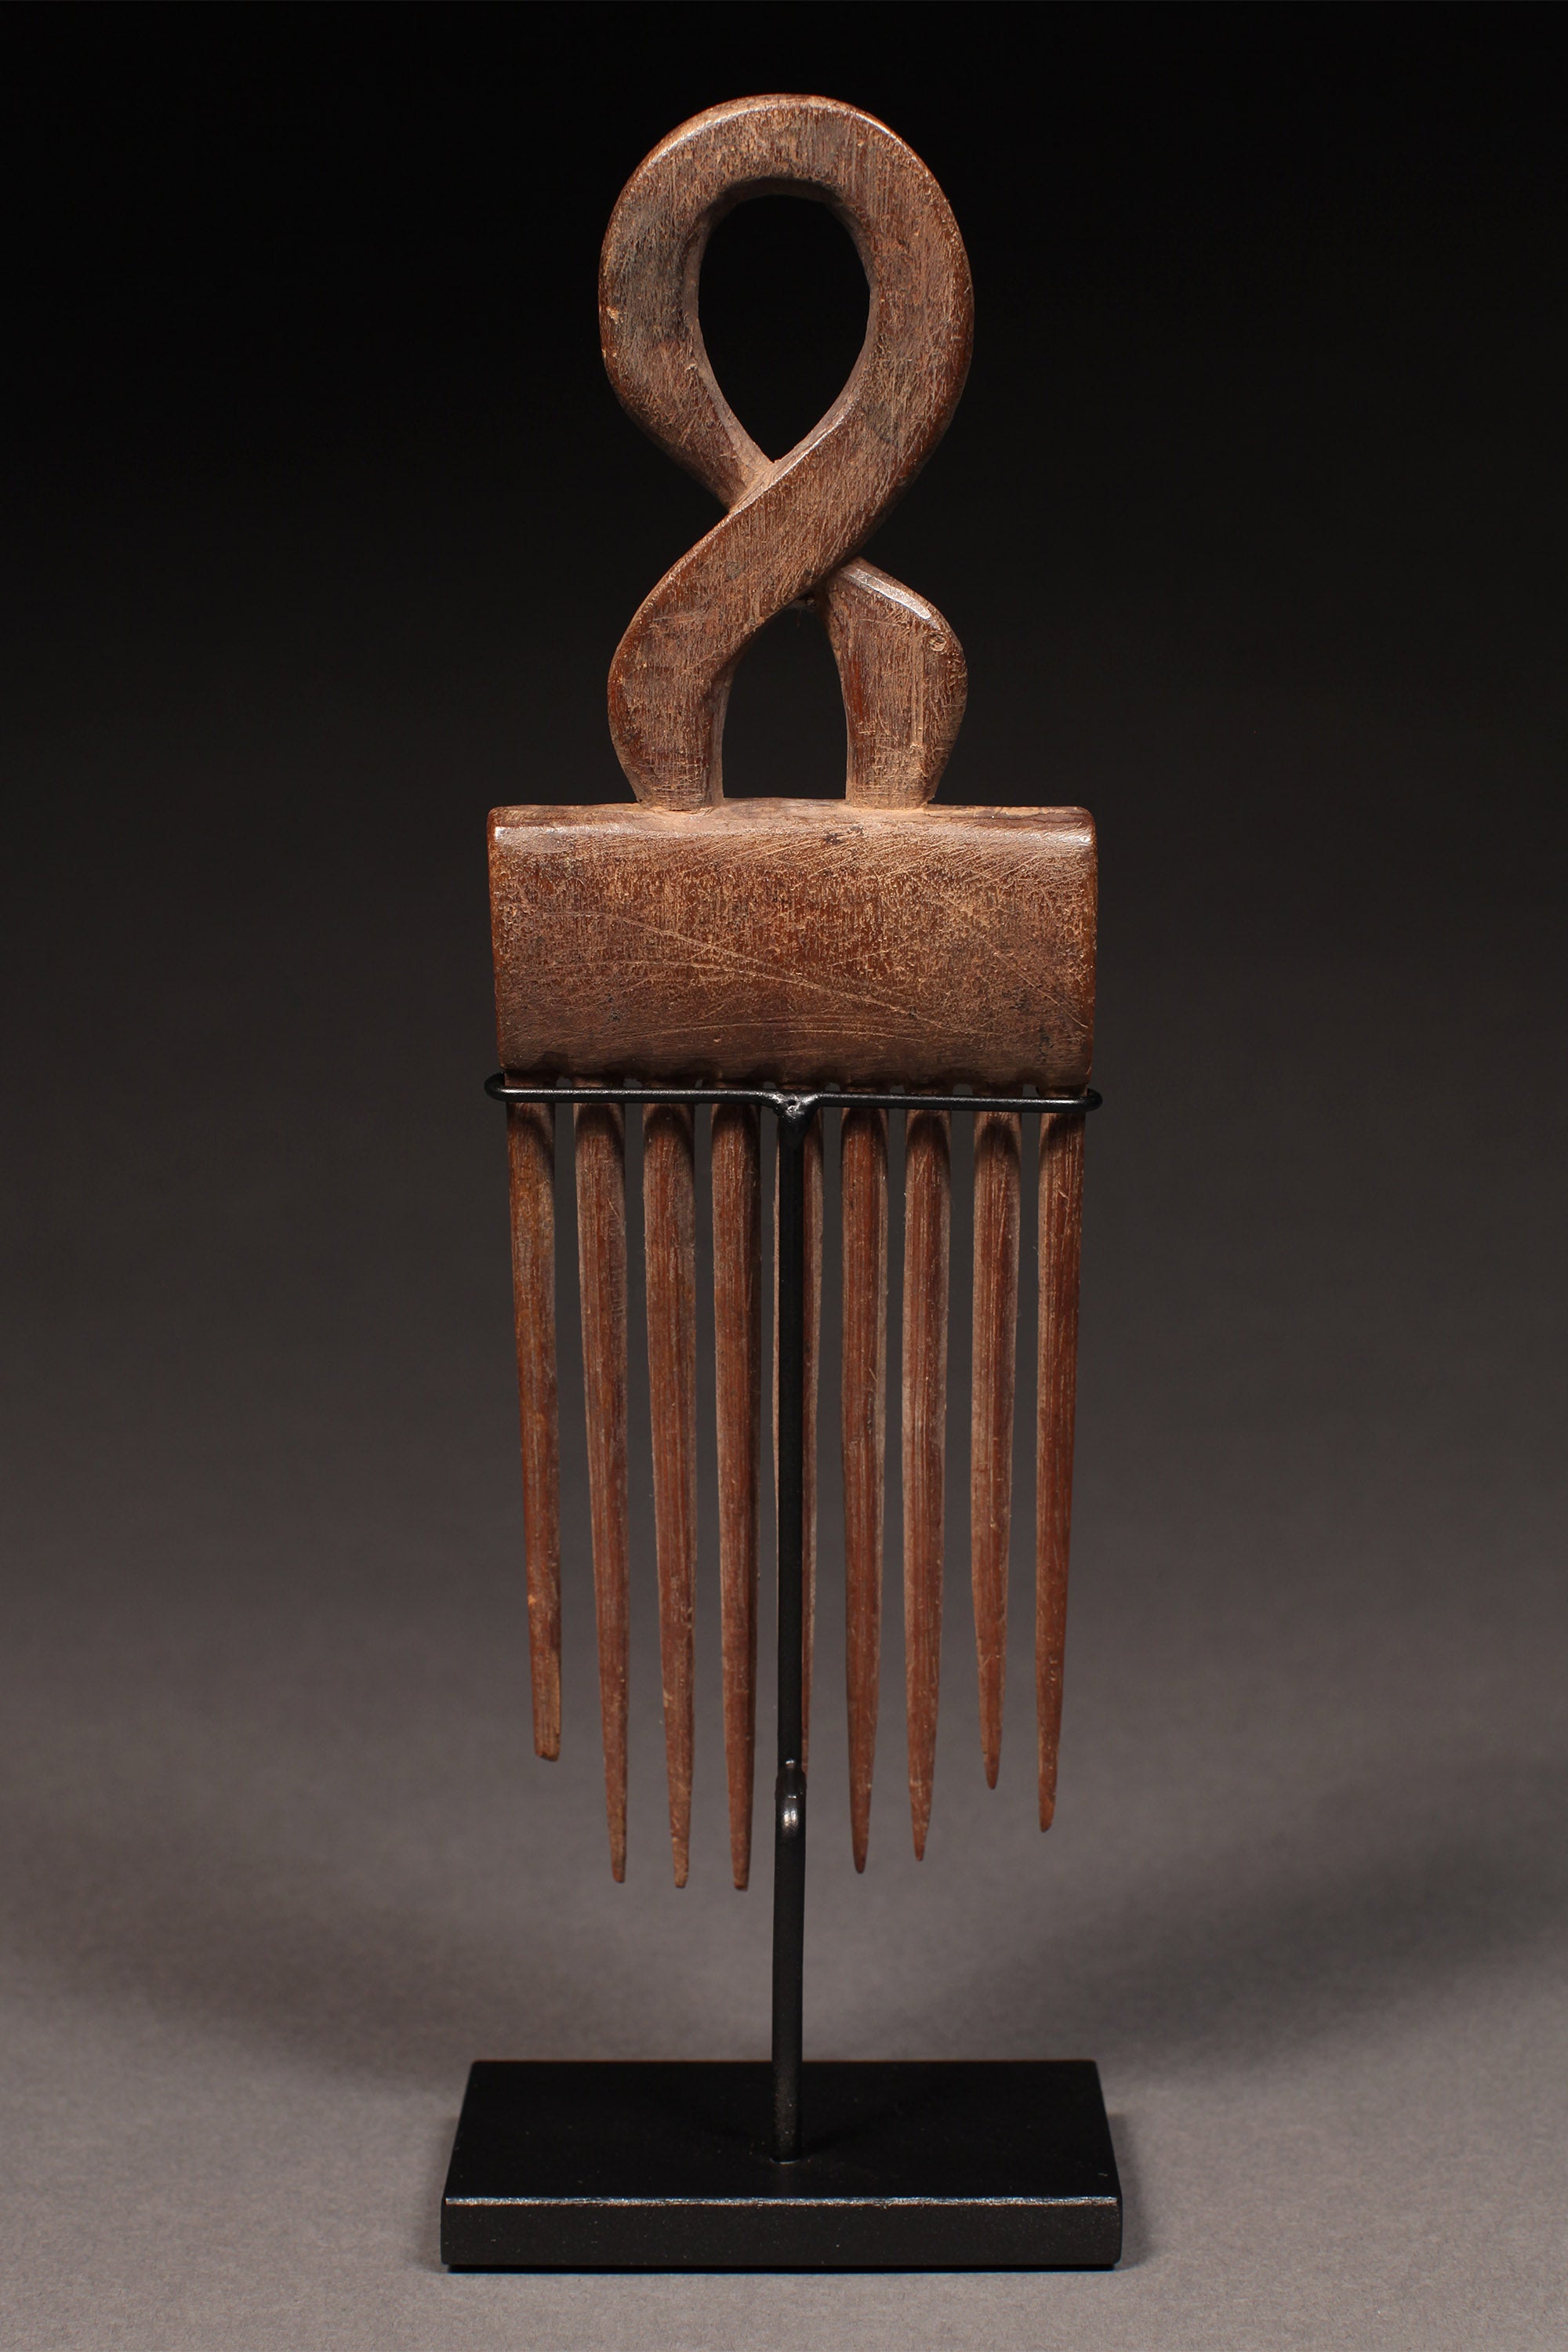 Tribal Objects - African Tribal Art - Ancient Ceremonial Art - Handcrafted Artifacts - Masks - Wood Sculptures - Iron Bronze Objects - Textiles - Art Pieces - African Folk Art - This classic comb with carved superstructure is a unique African sculpture, handmade by the Ashanti people of Ghana. It is crafted from fine wood and has a beautiful, intricate detail that makes it a true collectible.  H: 10” Inventory # 10414